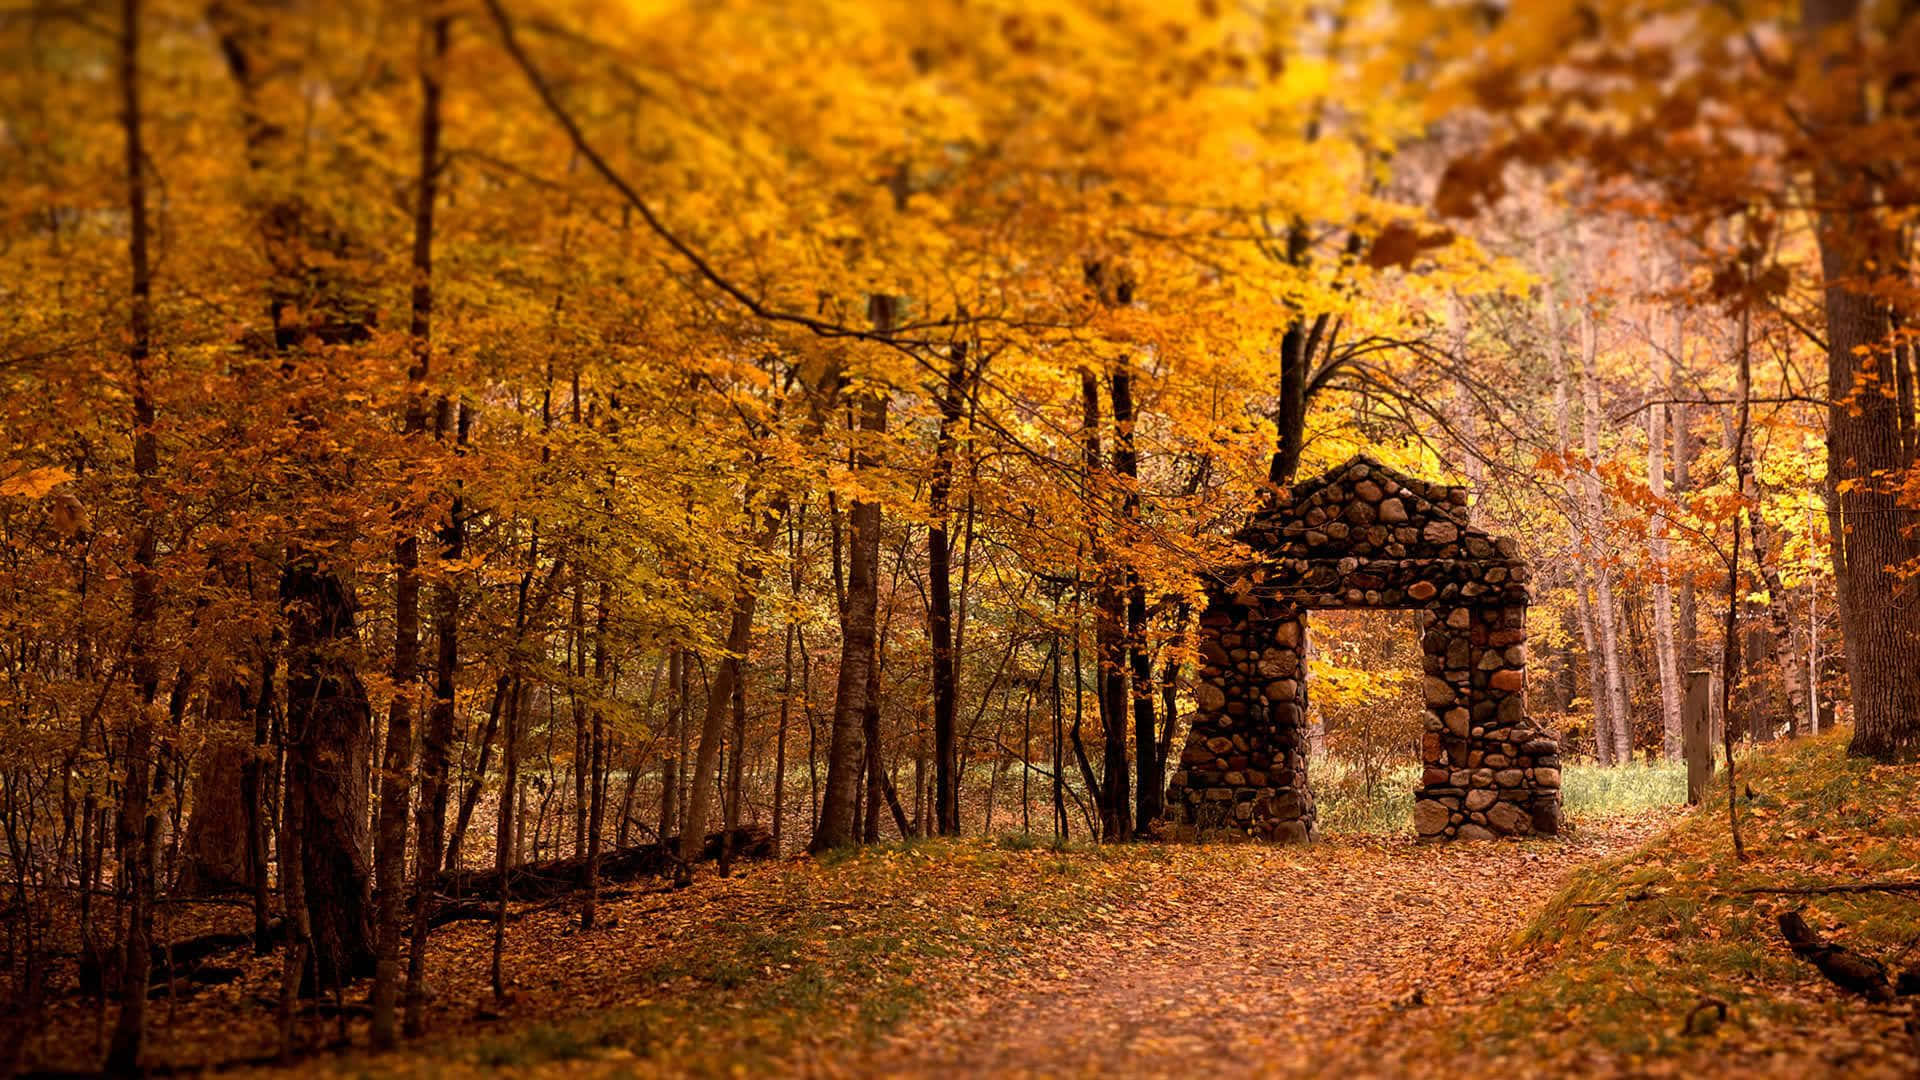 Celebrate the Changing Season with This Lively Fall Autumn Desktop Wallpaper Wallpaper